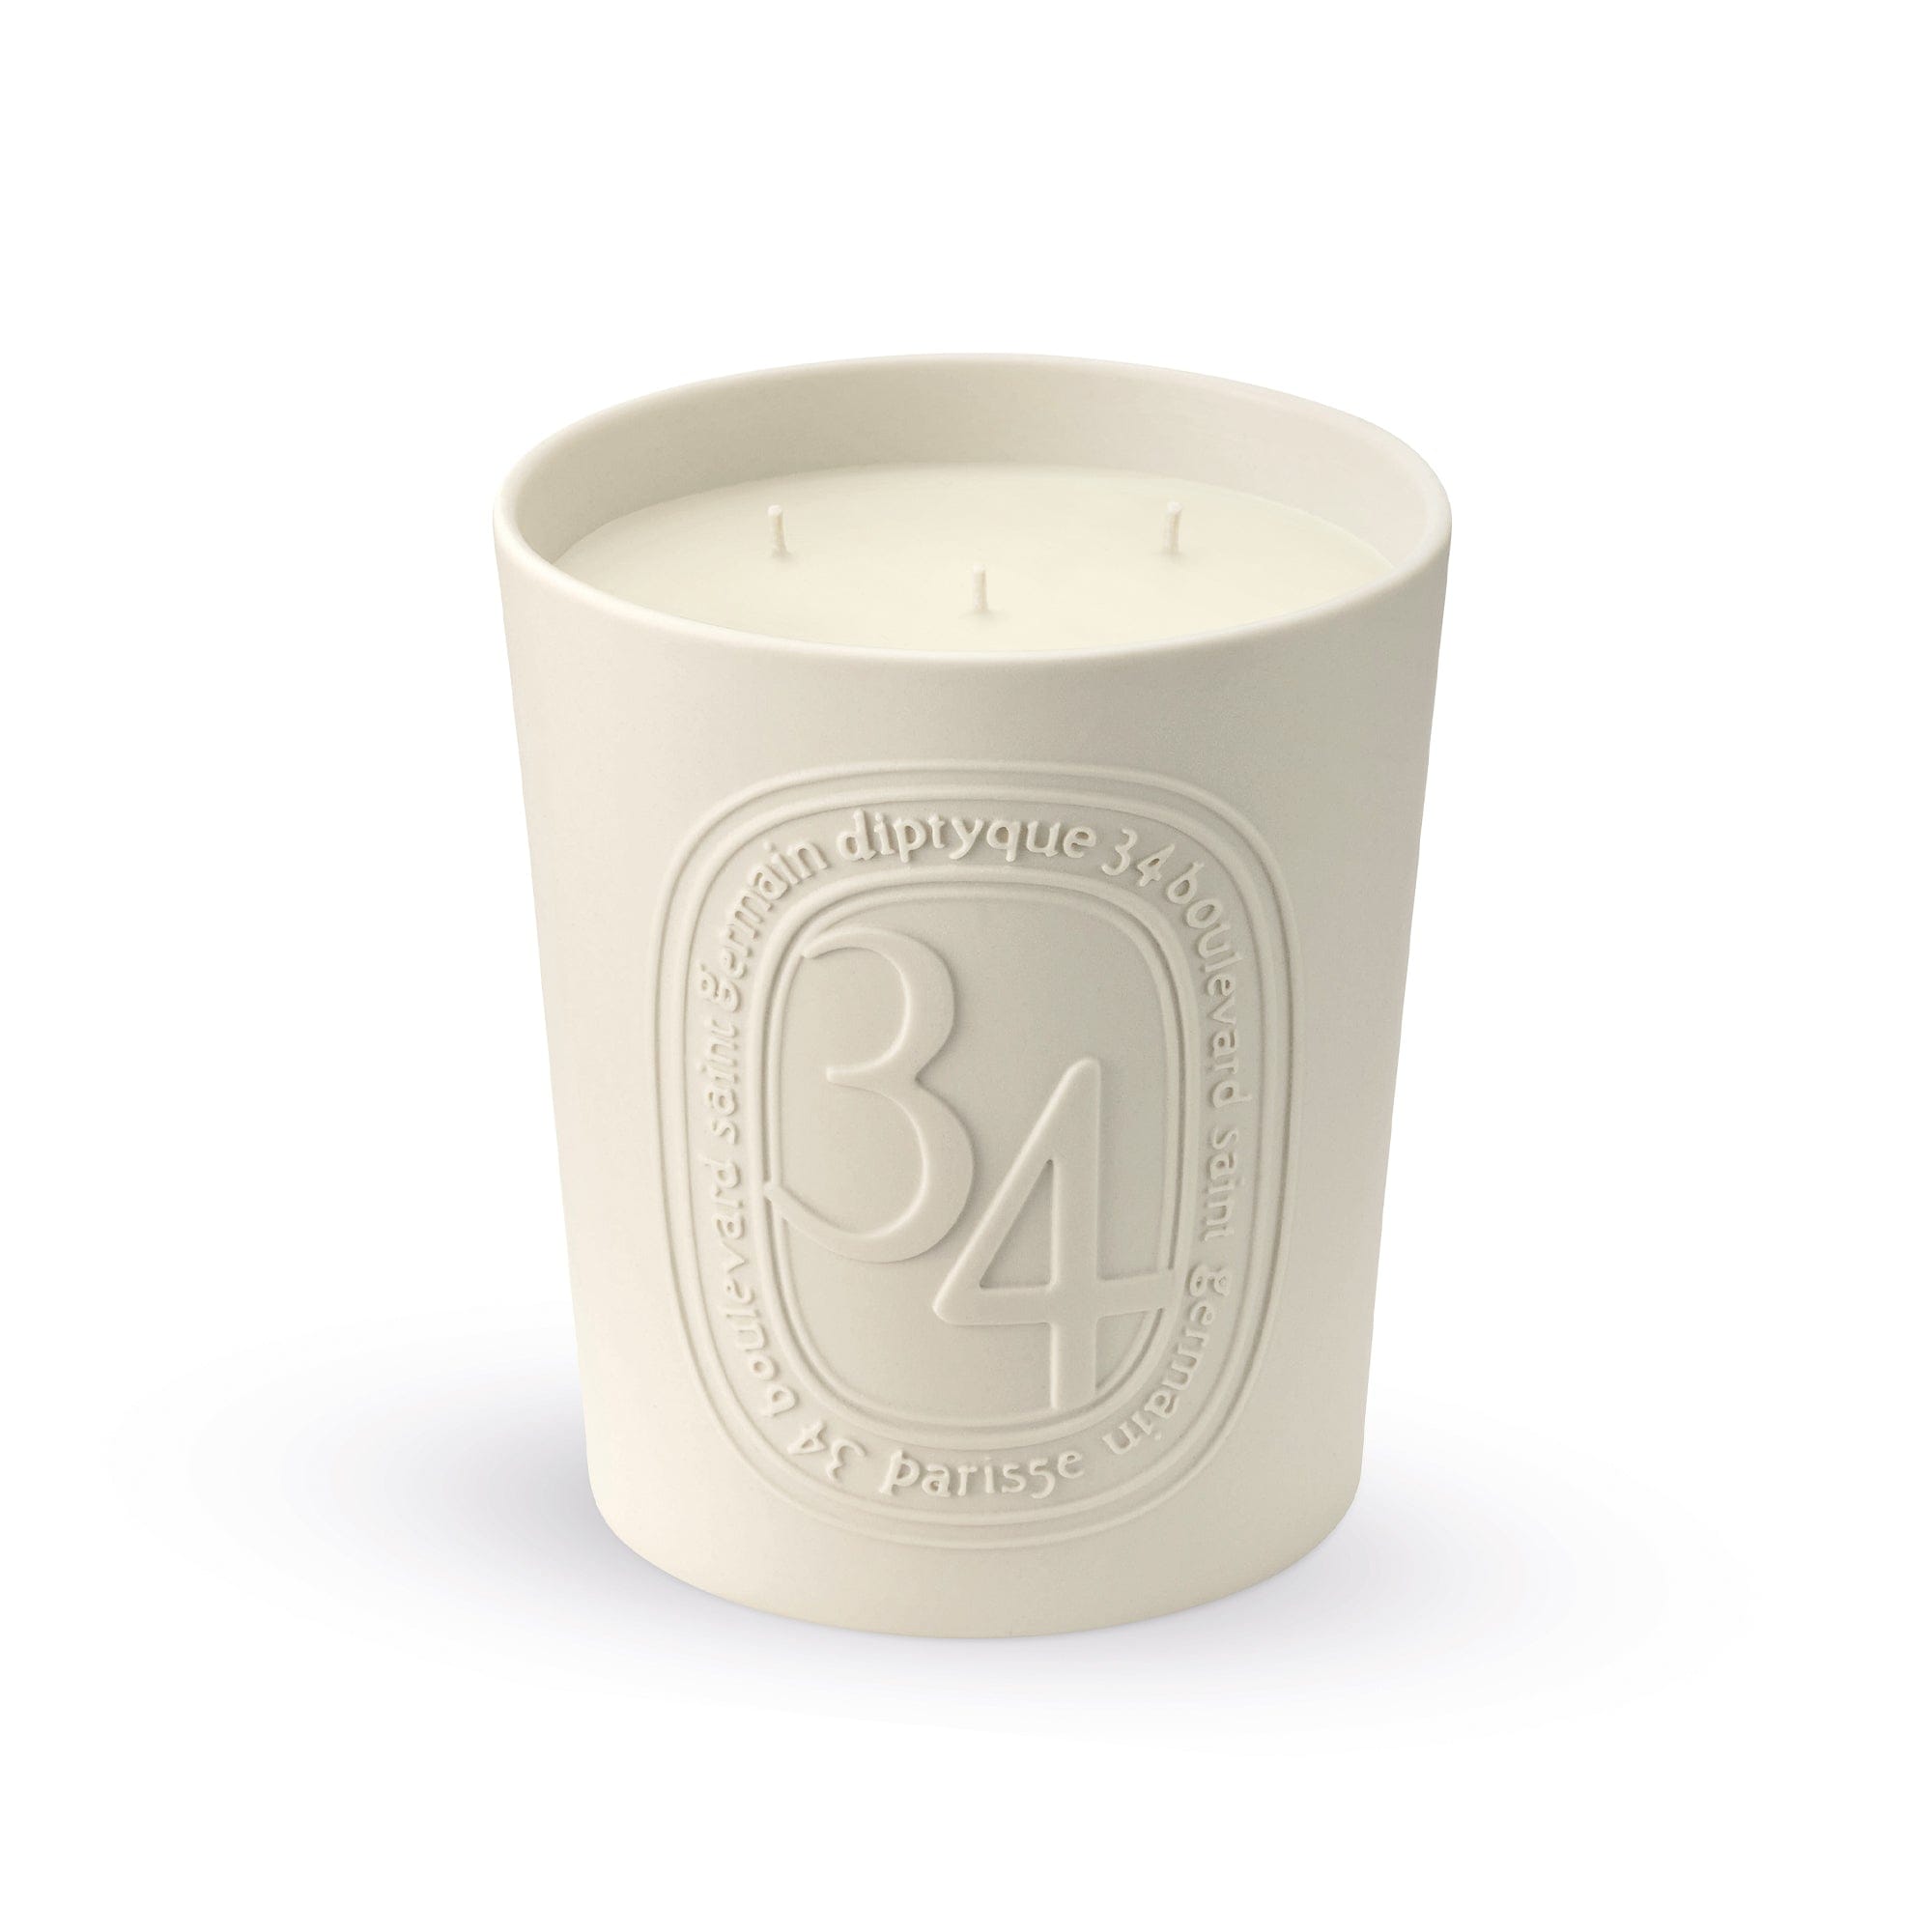 34 boulevard saint germain Diptyque Scented candle